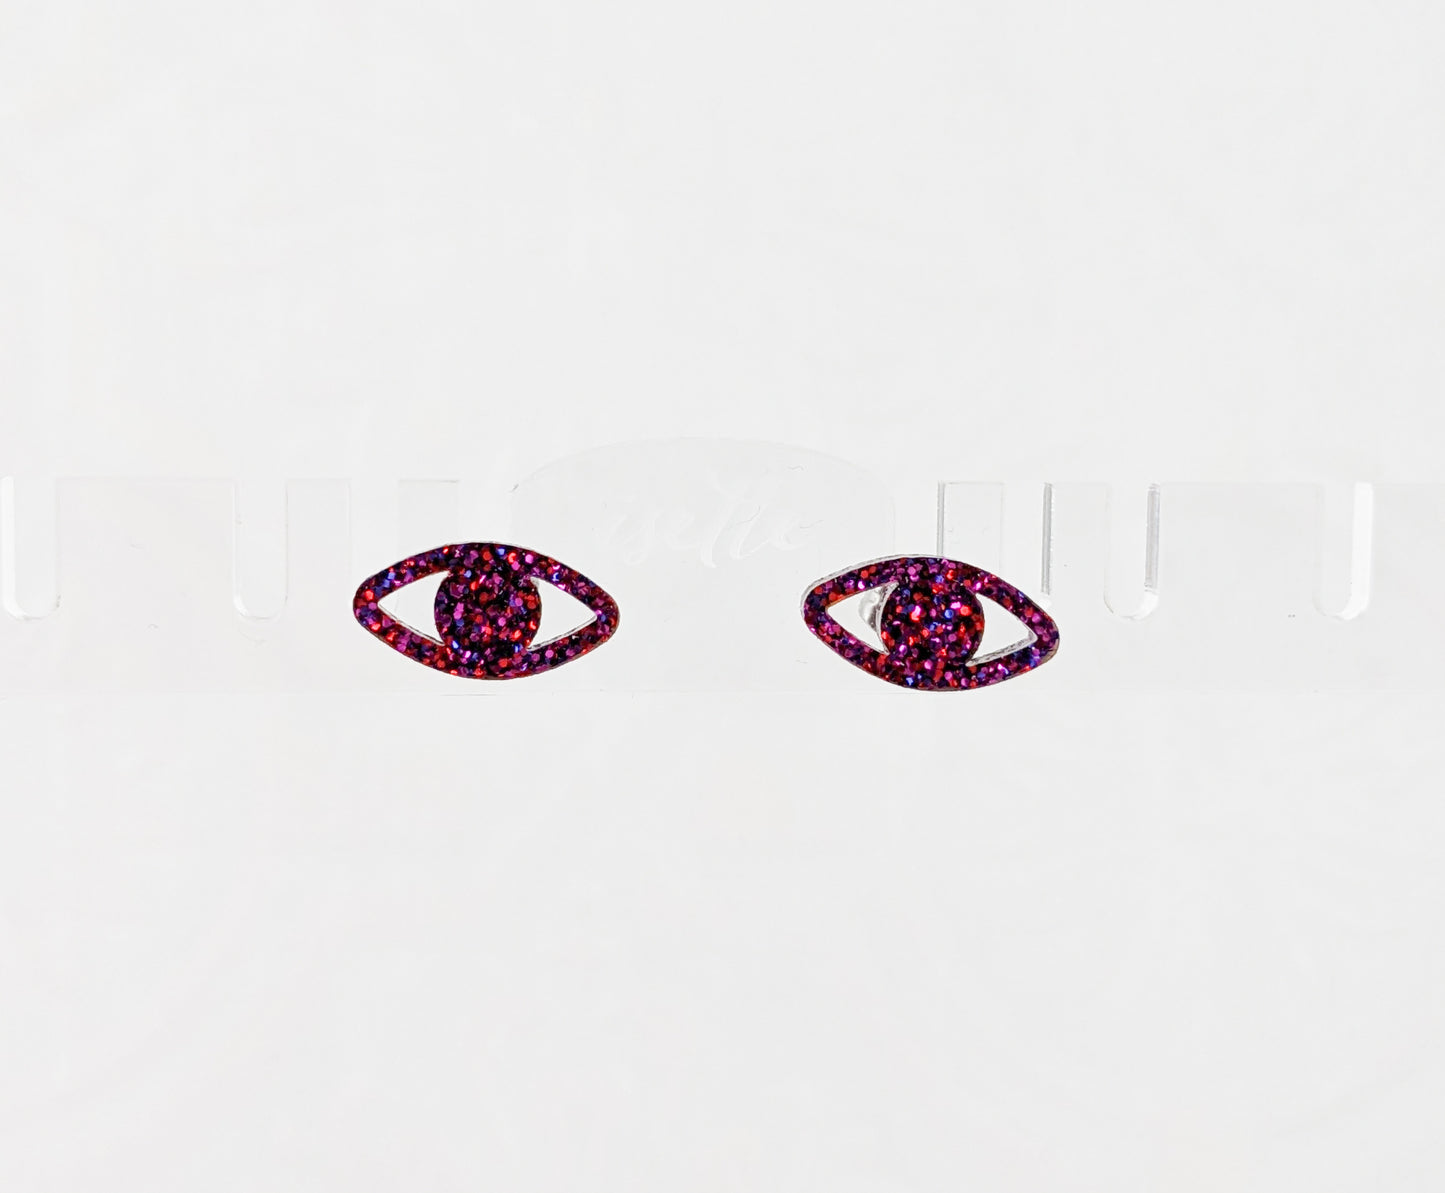 Peepers - Eye shaped stud earrings made with ruby sparkle acrylic and stainless steel posts floating